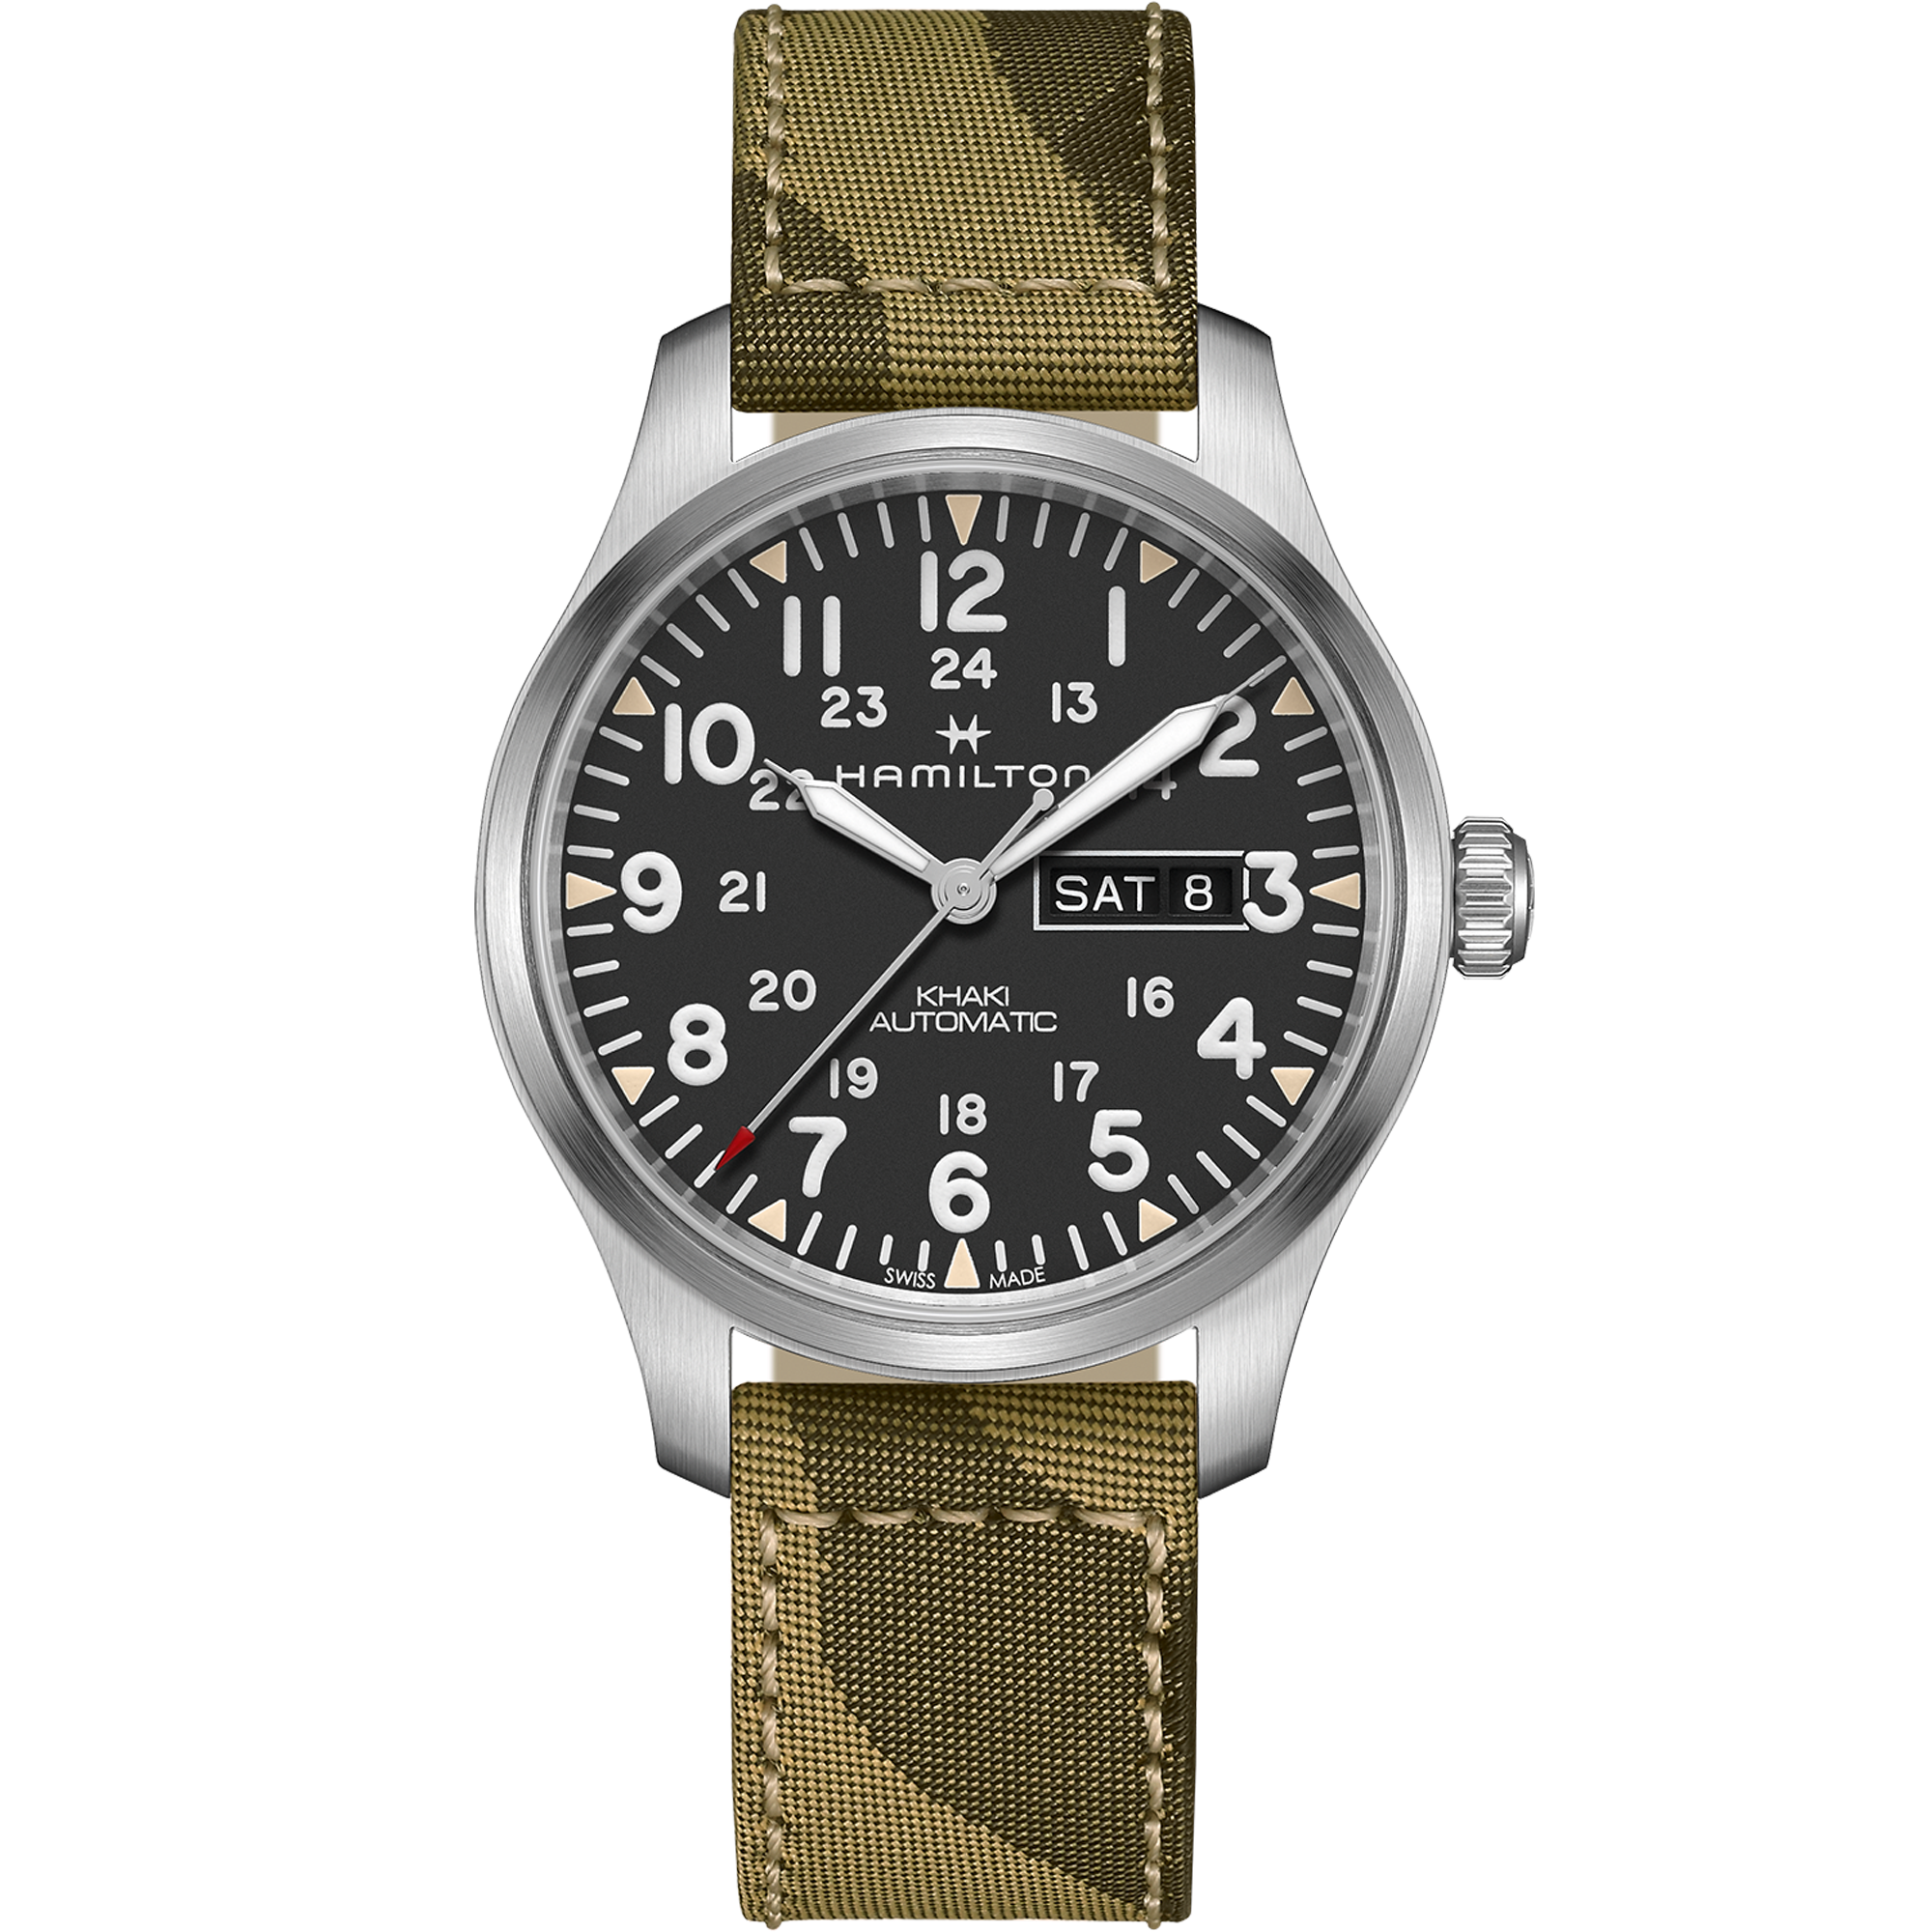 Khaki Field Automatic Watch Day Date - Black Dial - H70535031